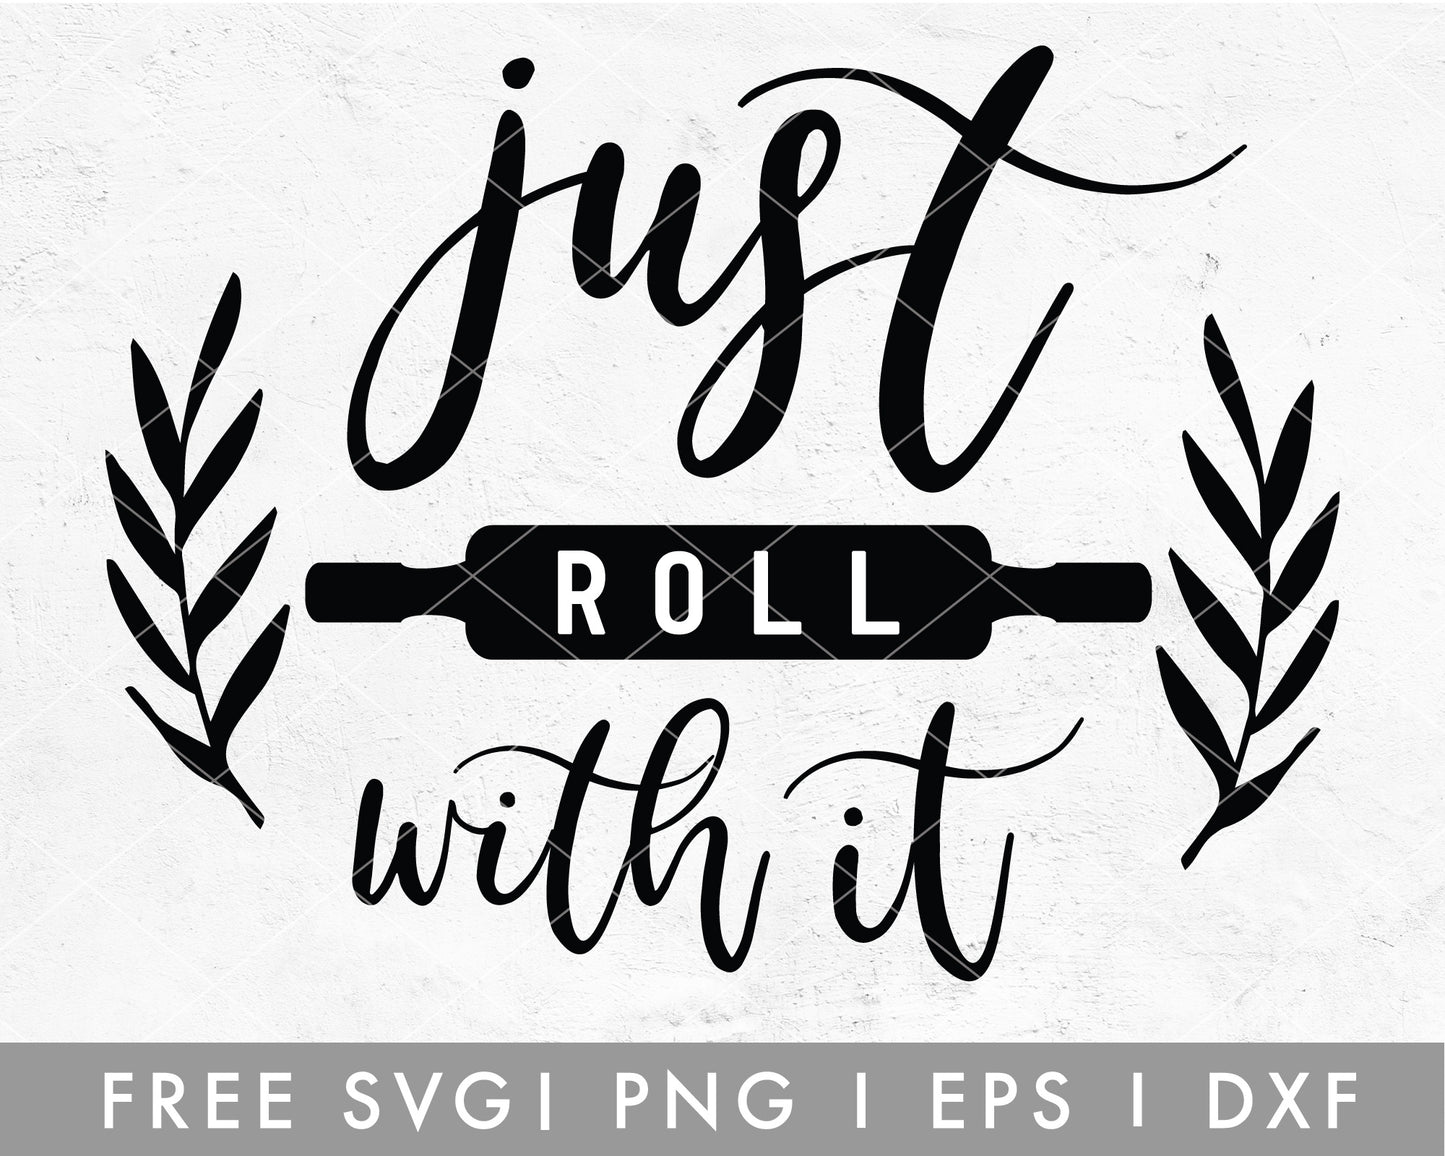 FREE Just Roll With It SVG Cut File for Cricut, Cameo Silhouette | Free SVG, PNG, Vector